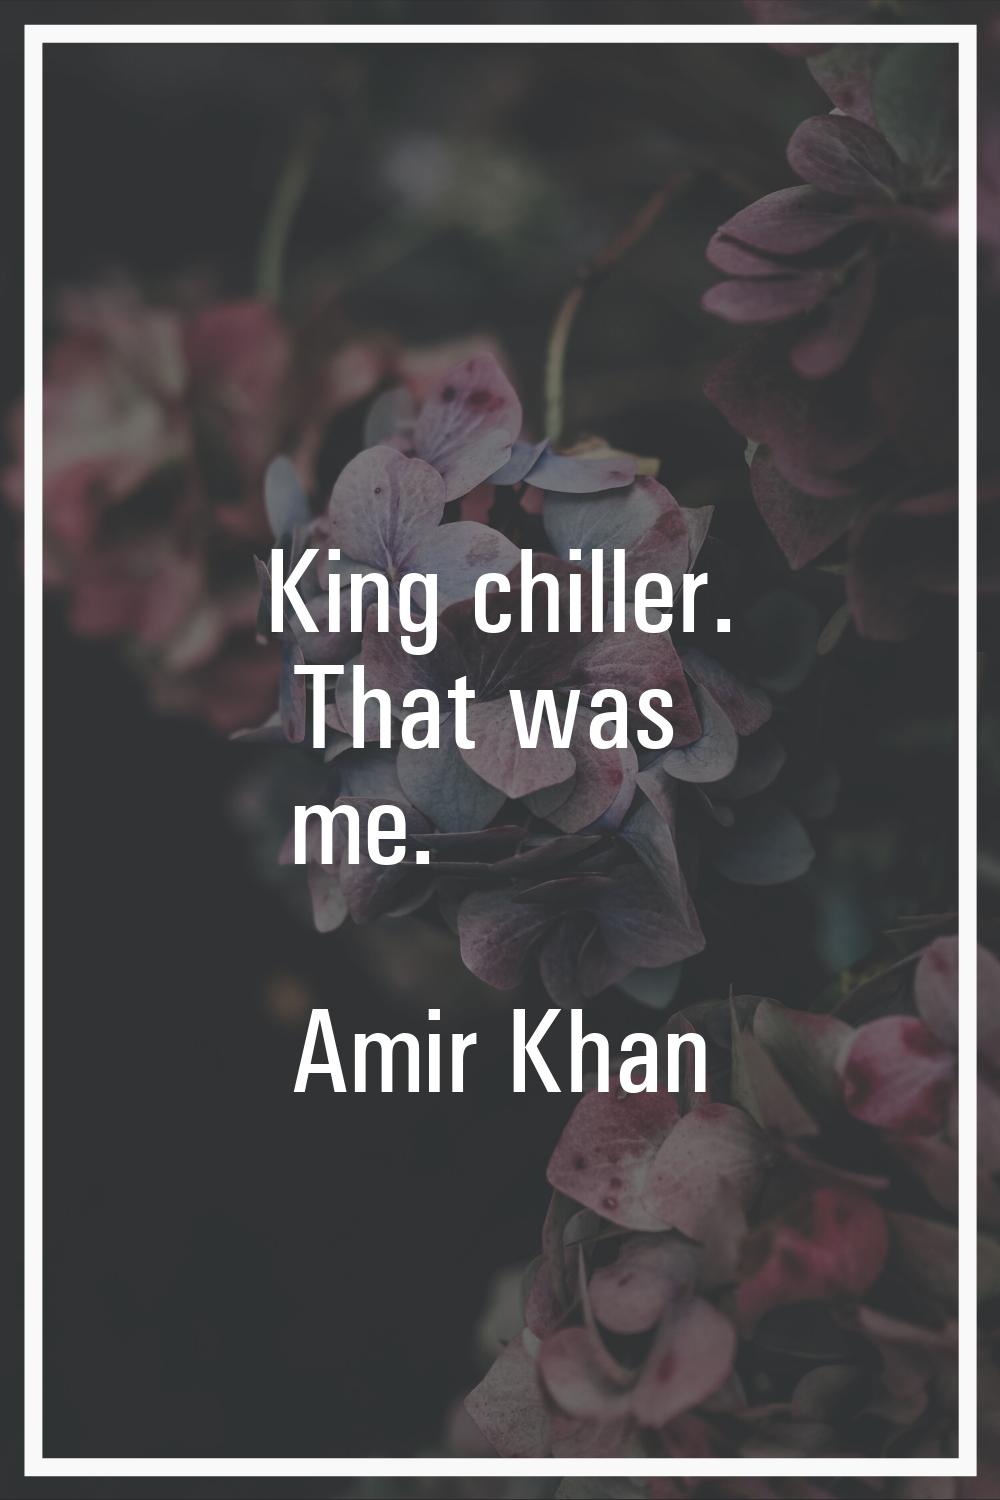 King chiller. That was me.